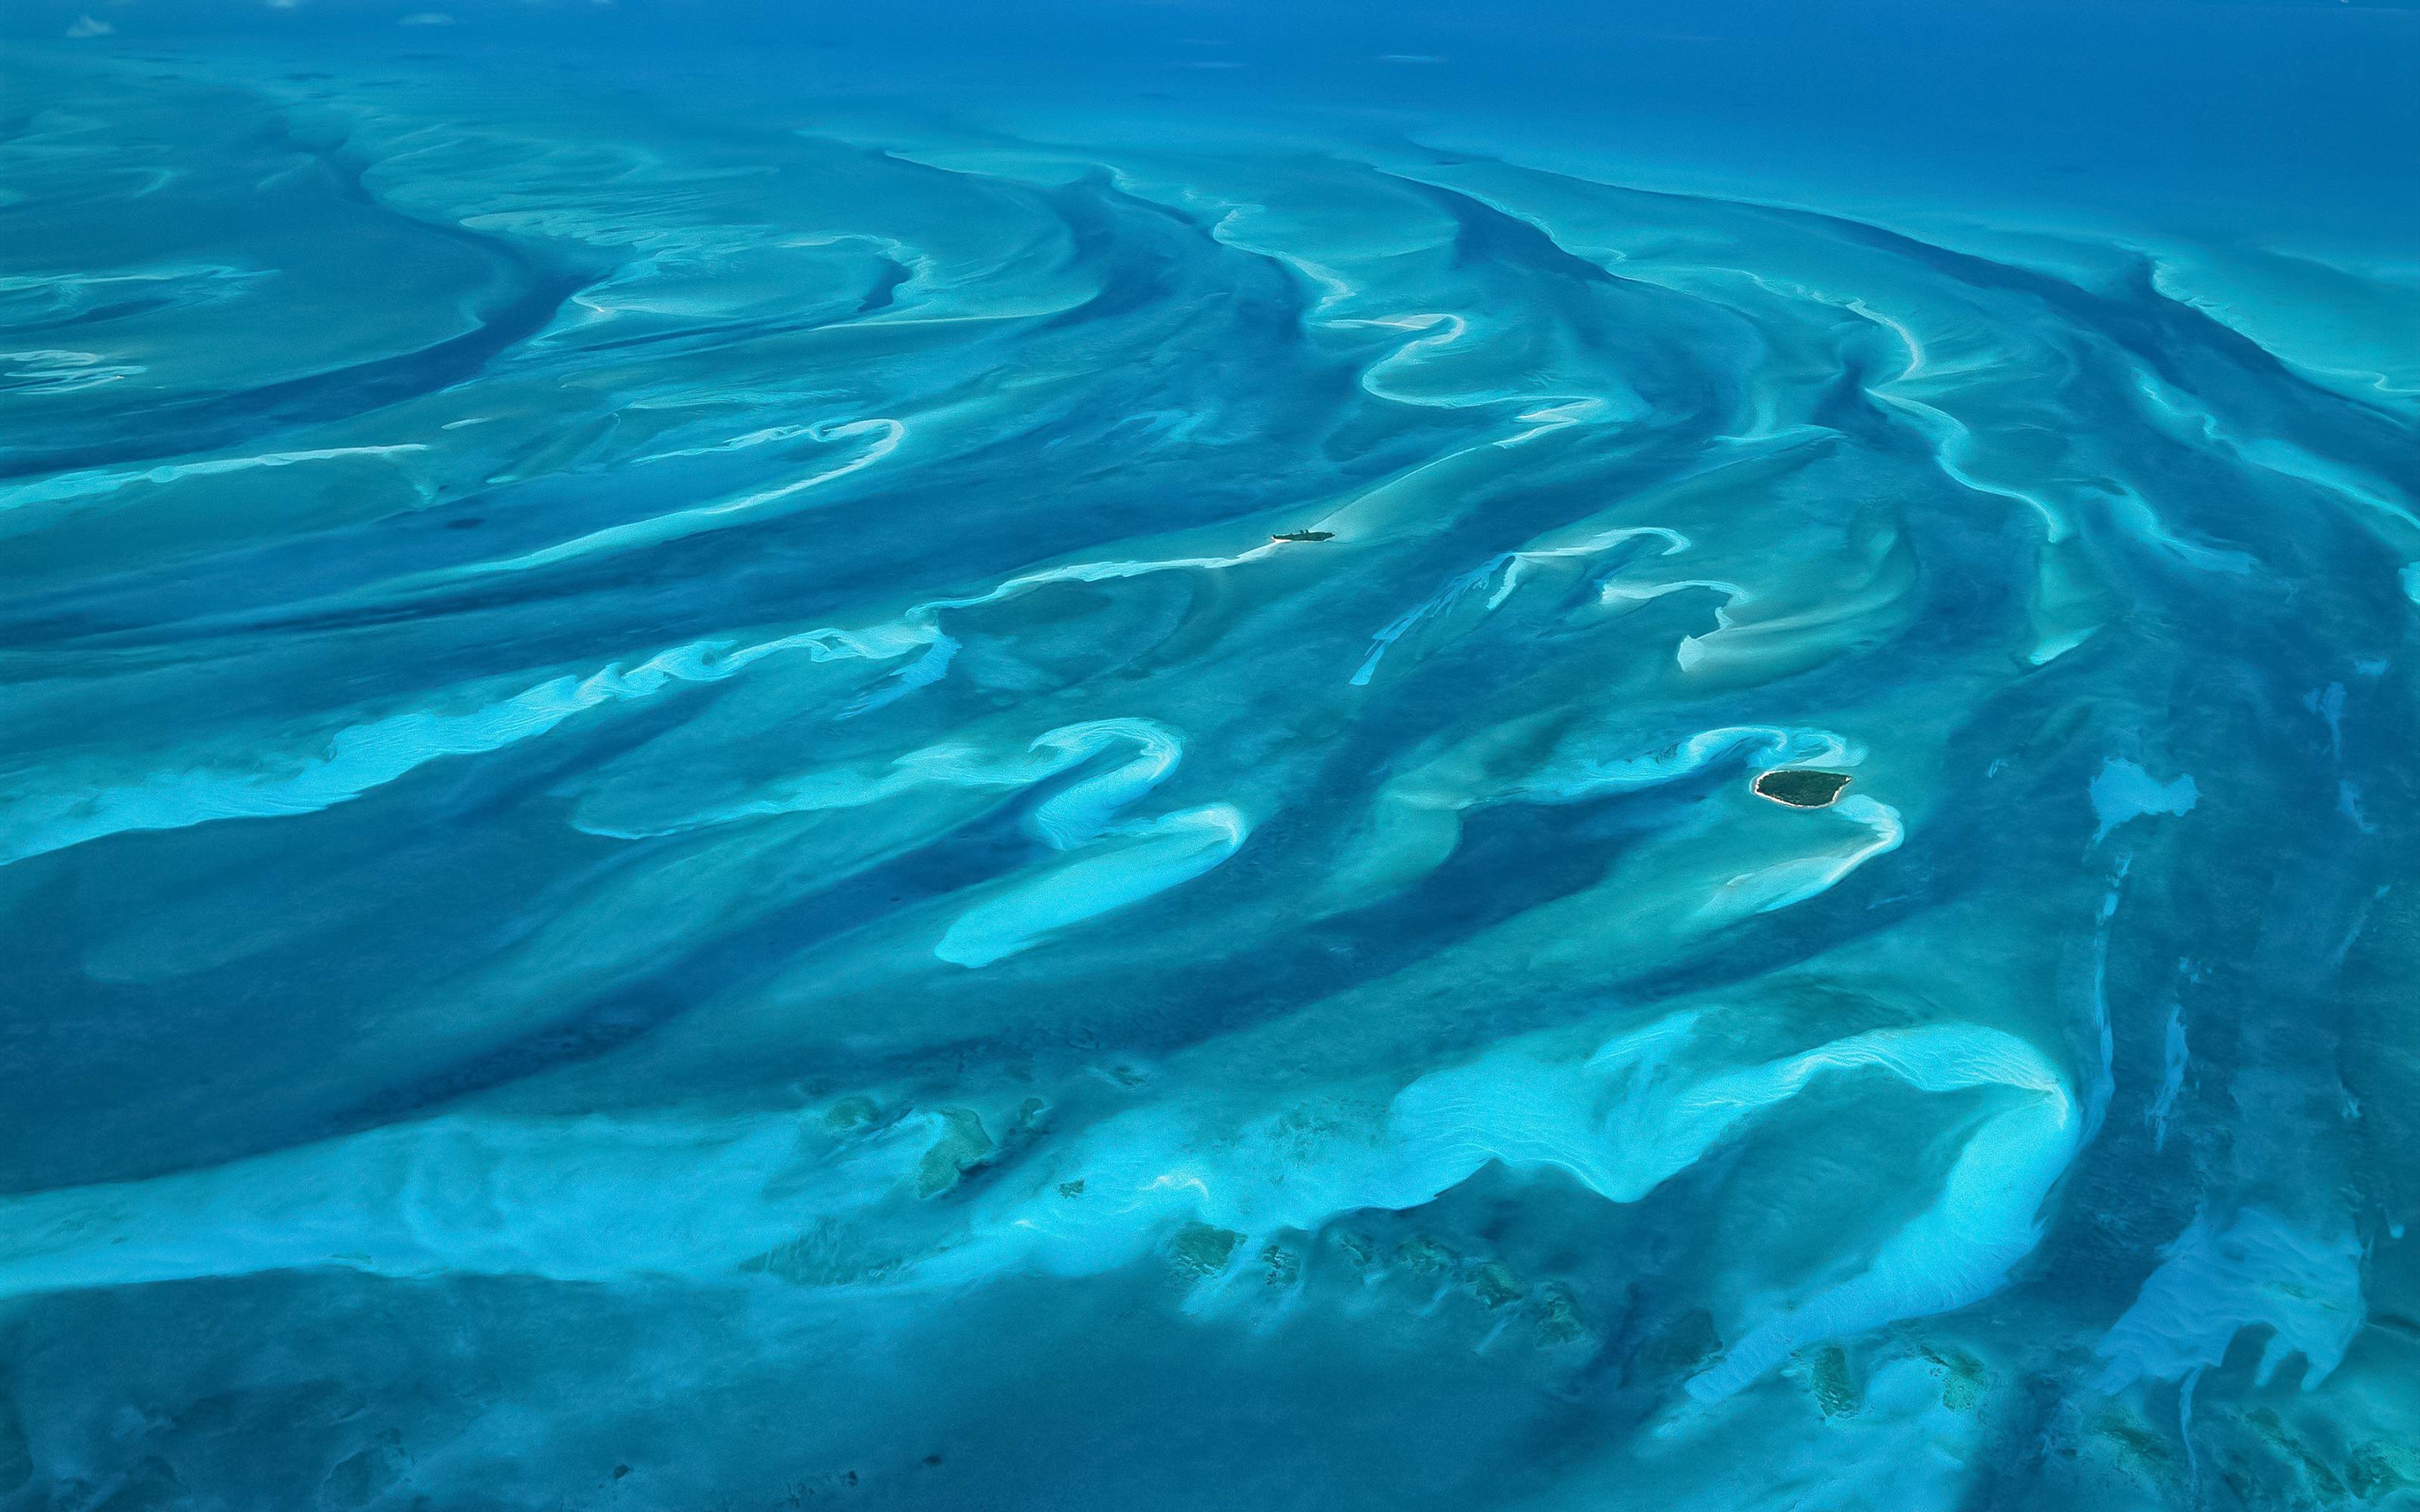 Lost Islands for 2880 x 1800 Retina Display resolution